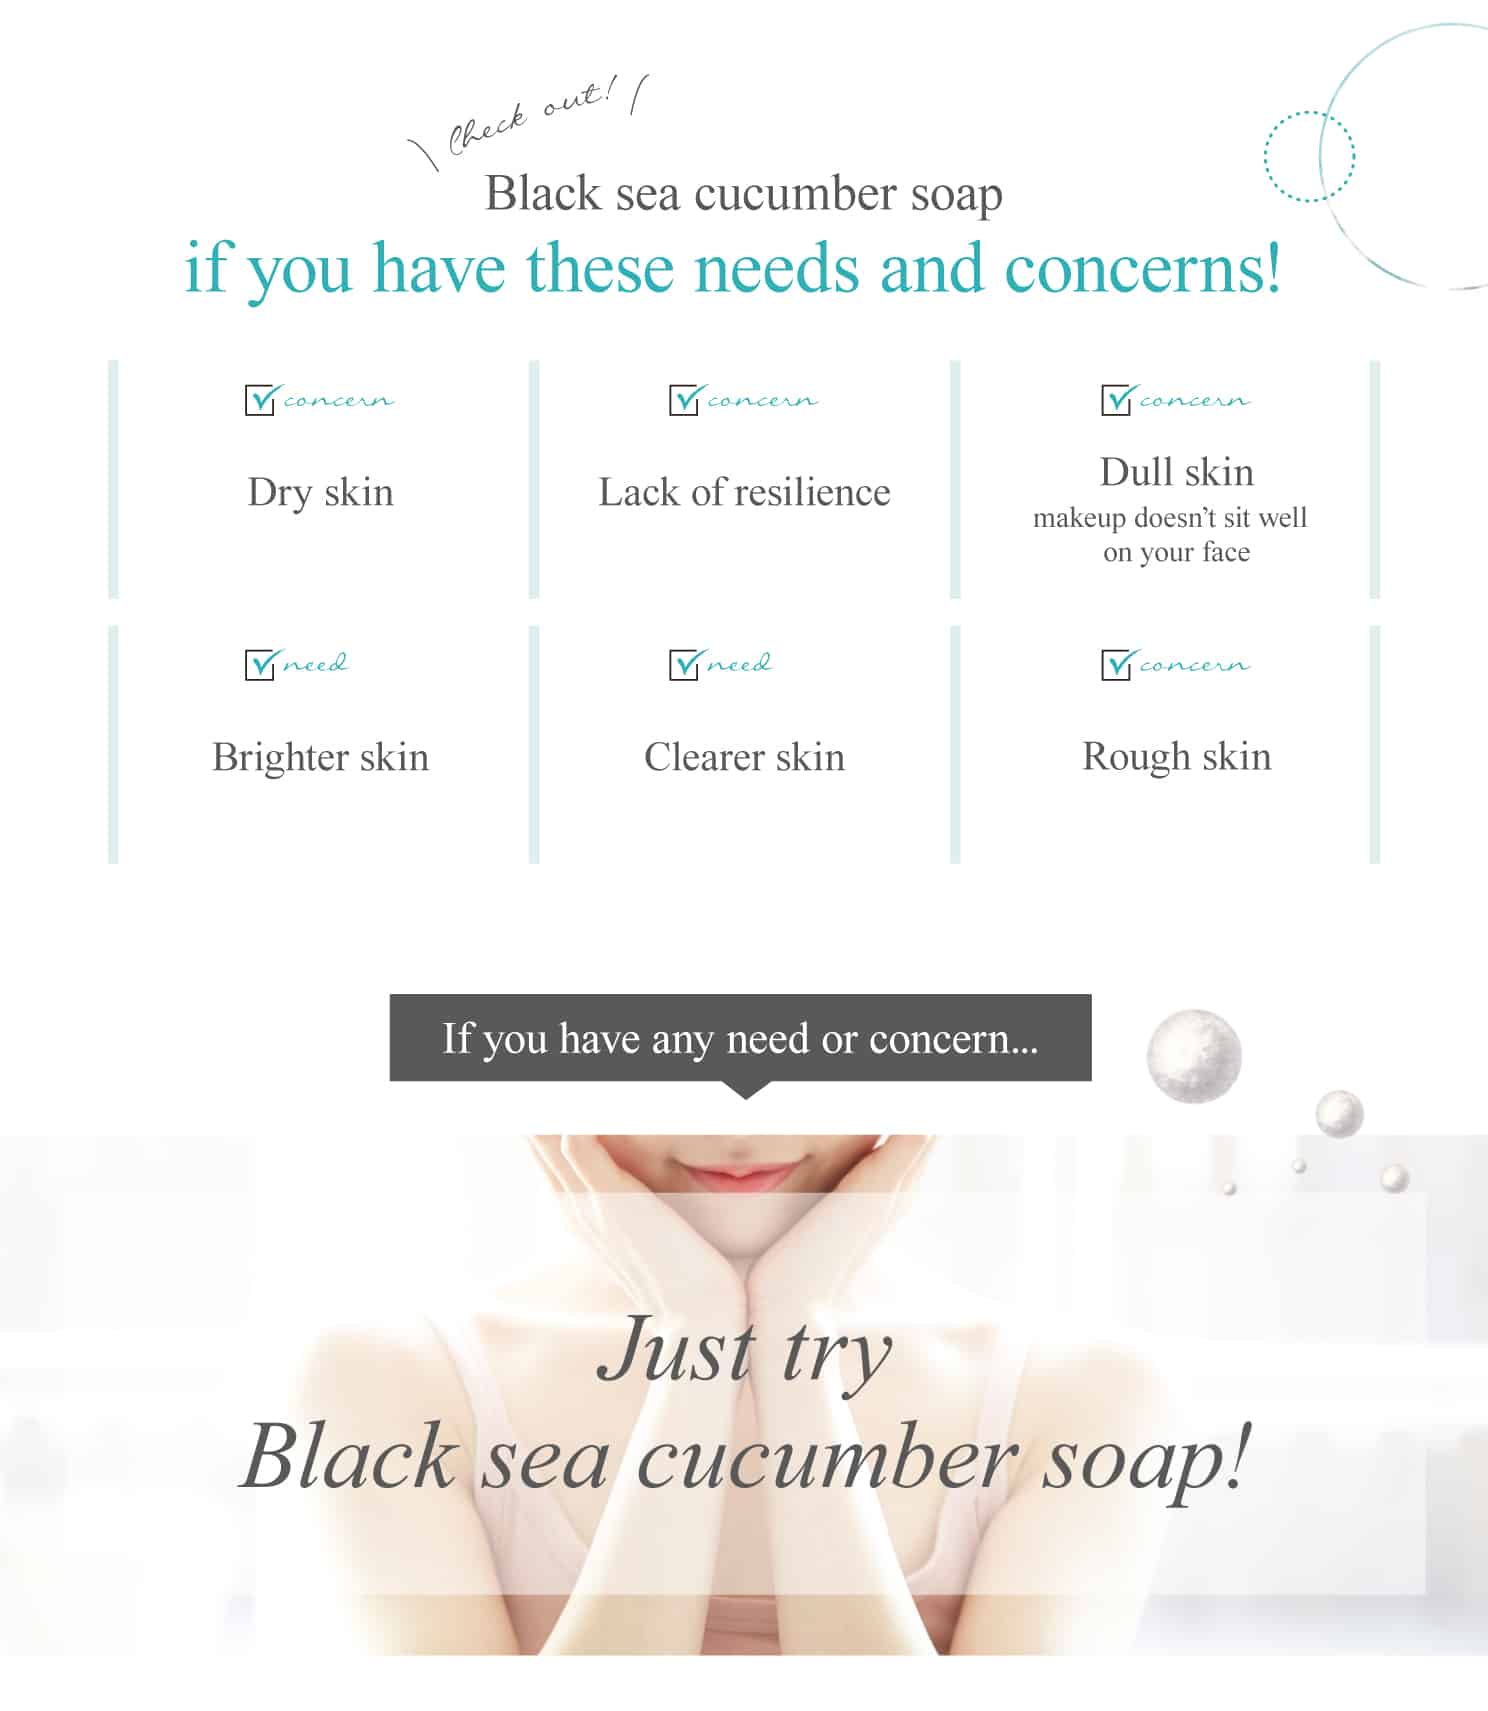 Just try Black sea cucumber soap!